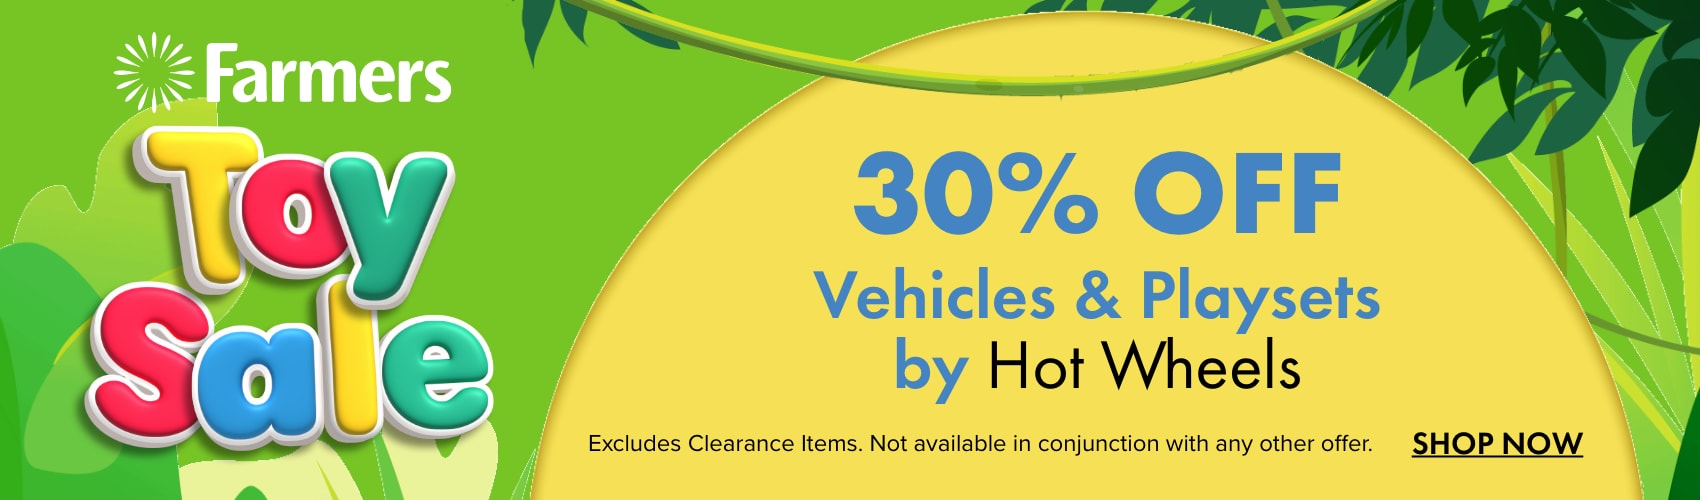 30% OFF Vehicles & Playsets by Hot Wheels